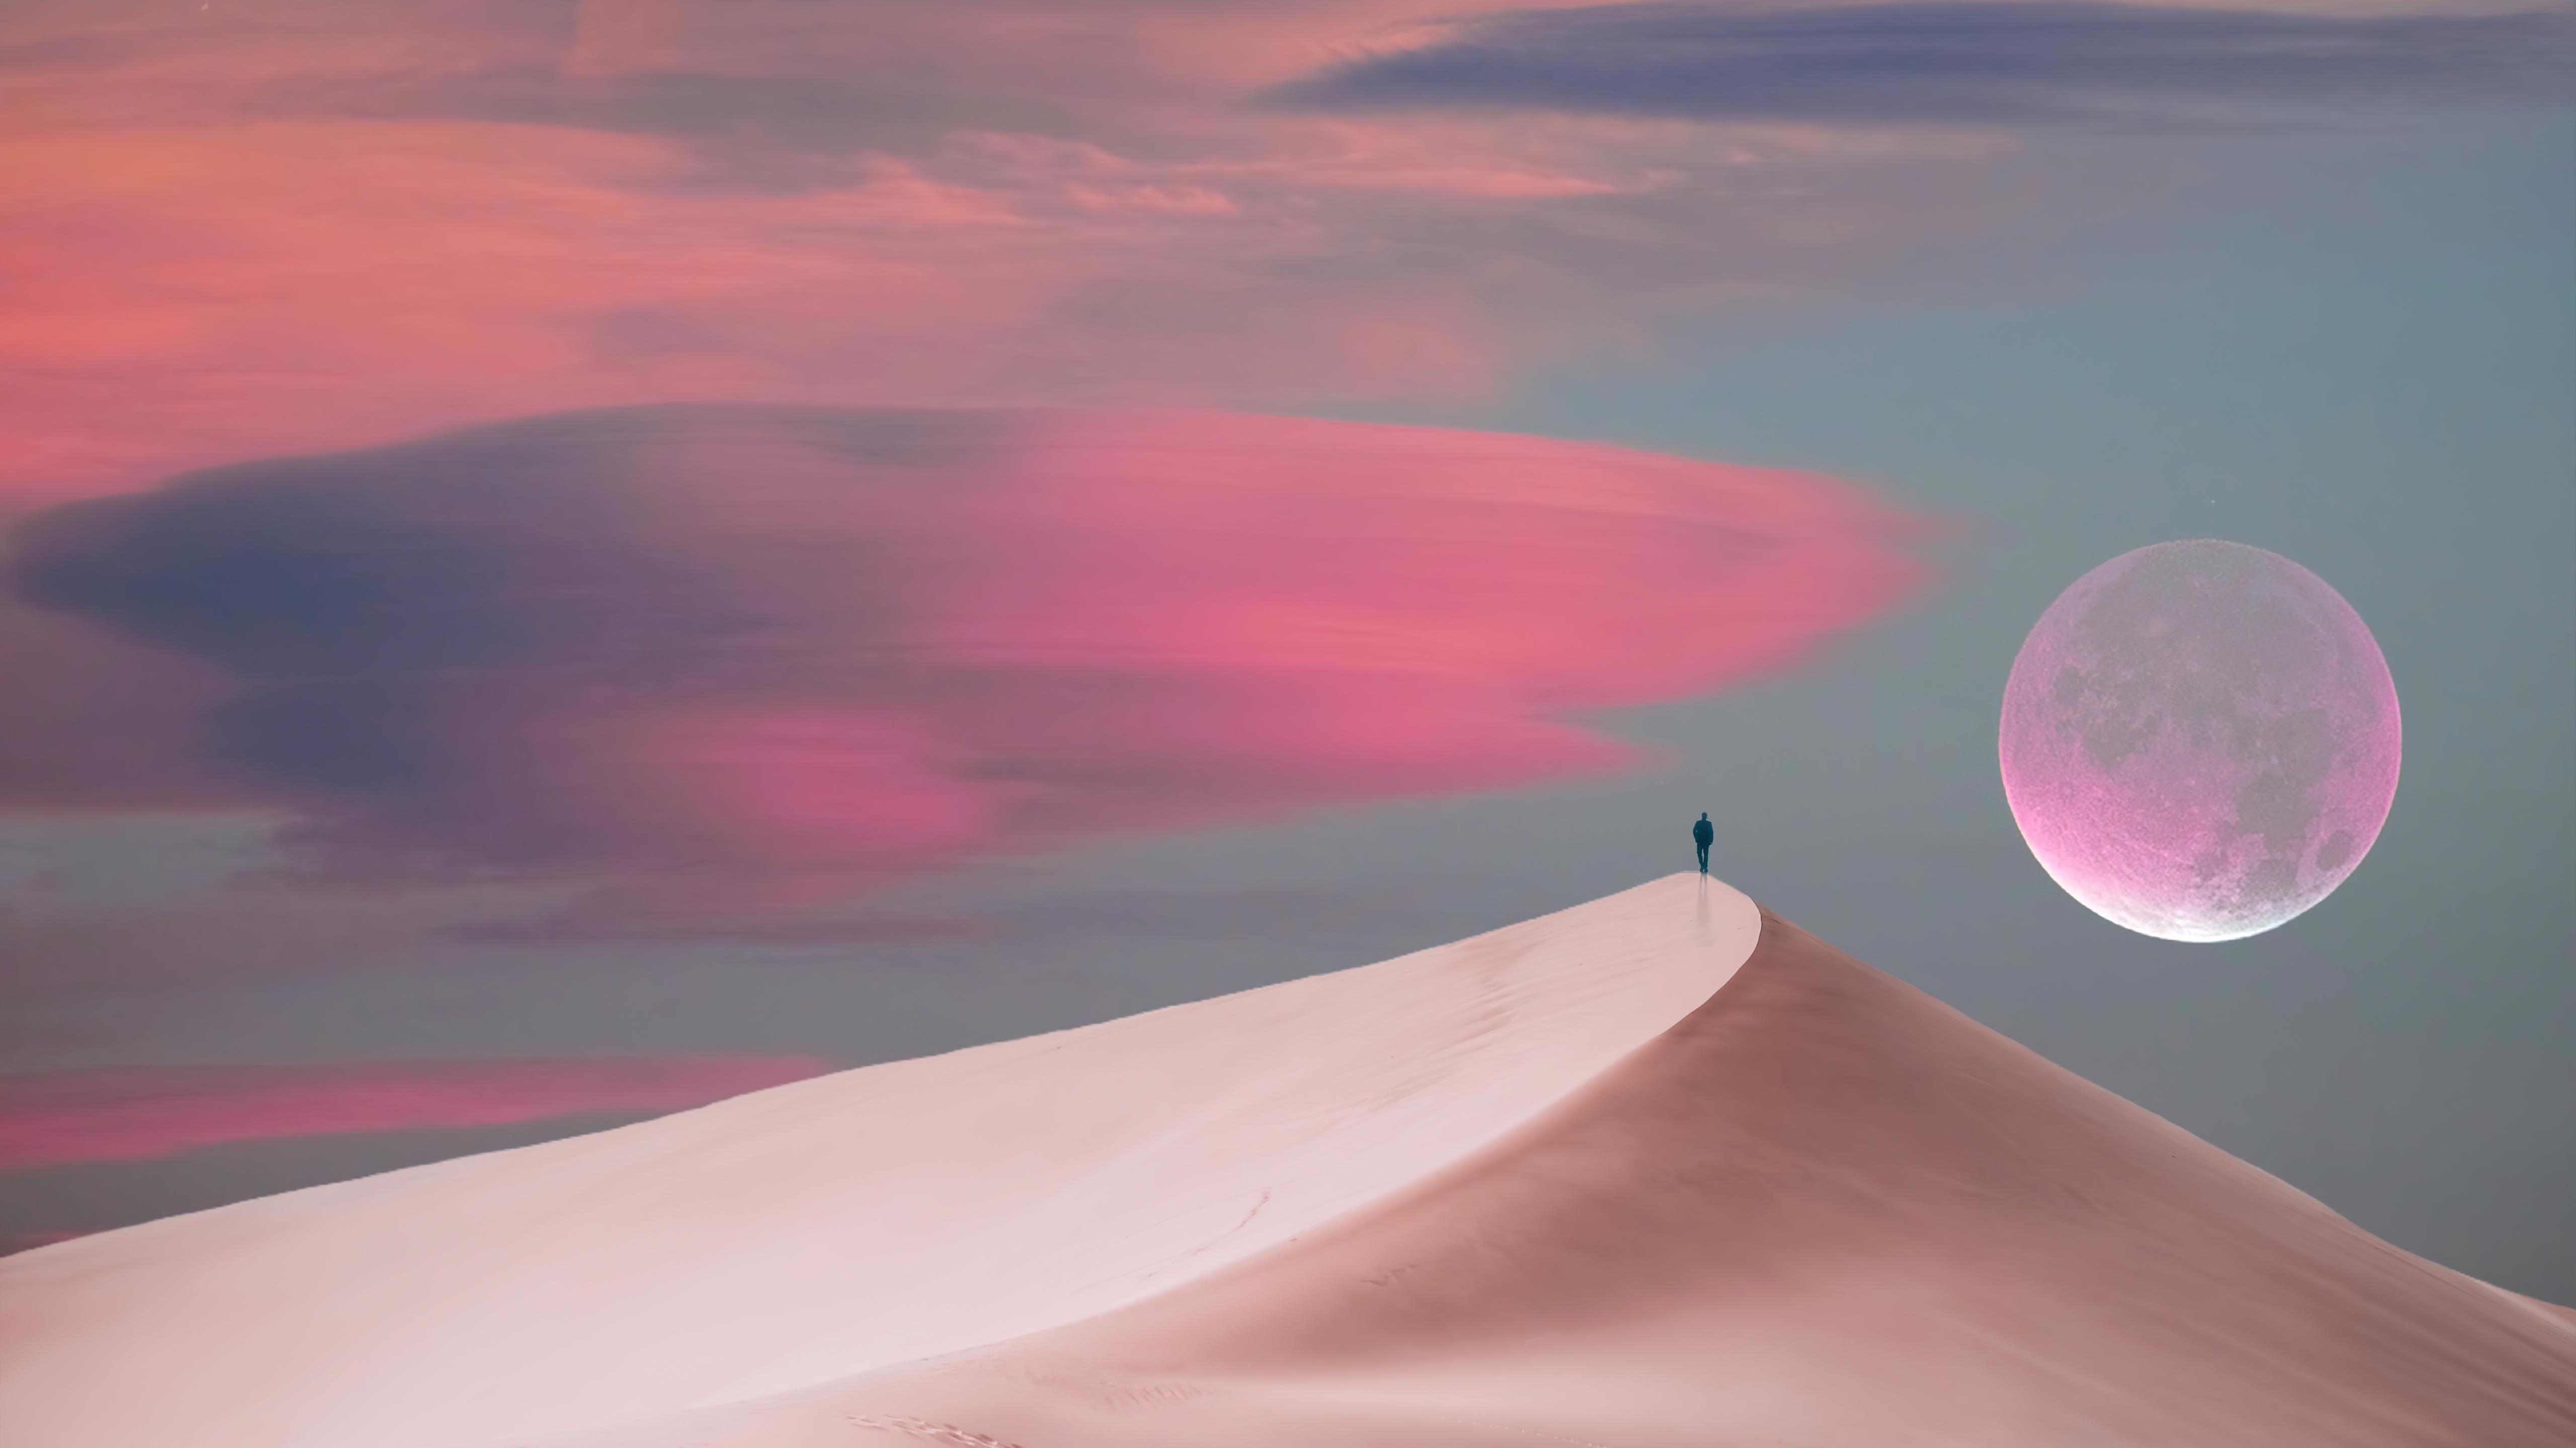 Artistic Desert 4k Ultra HD Wallpaper By Outrunyouth